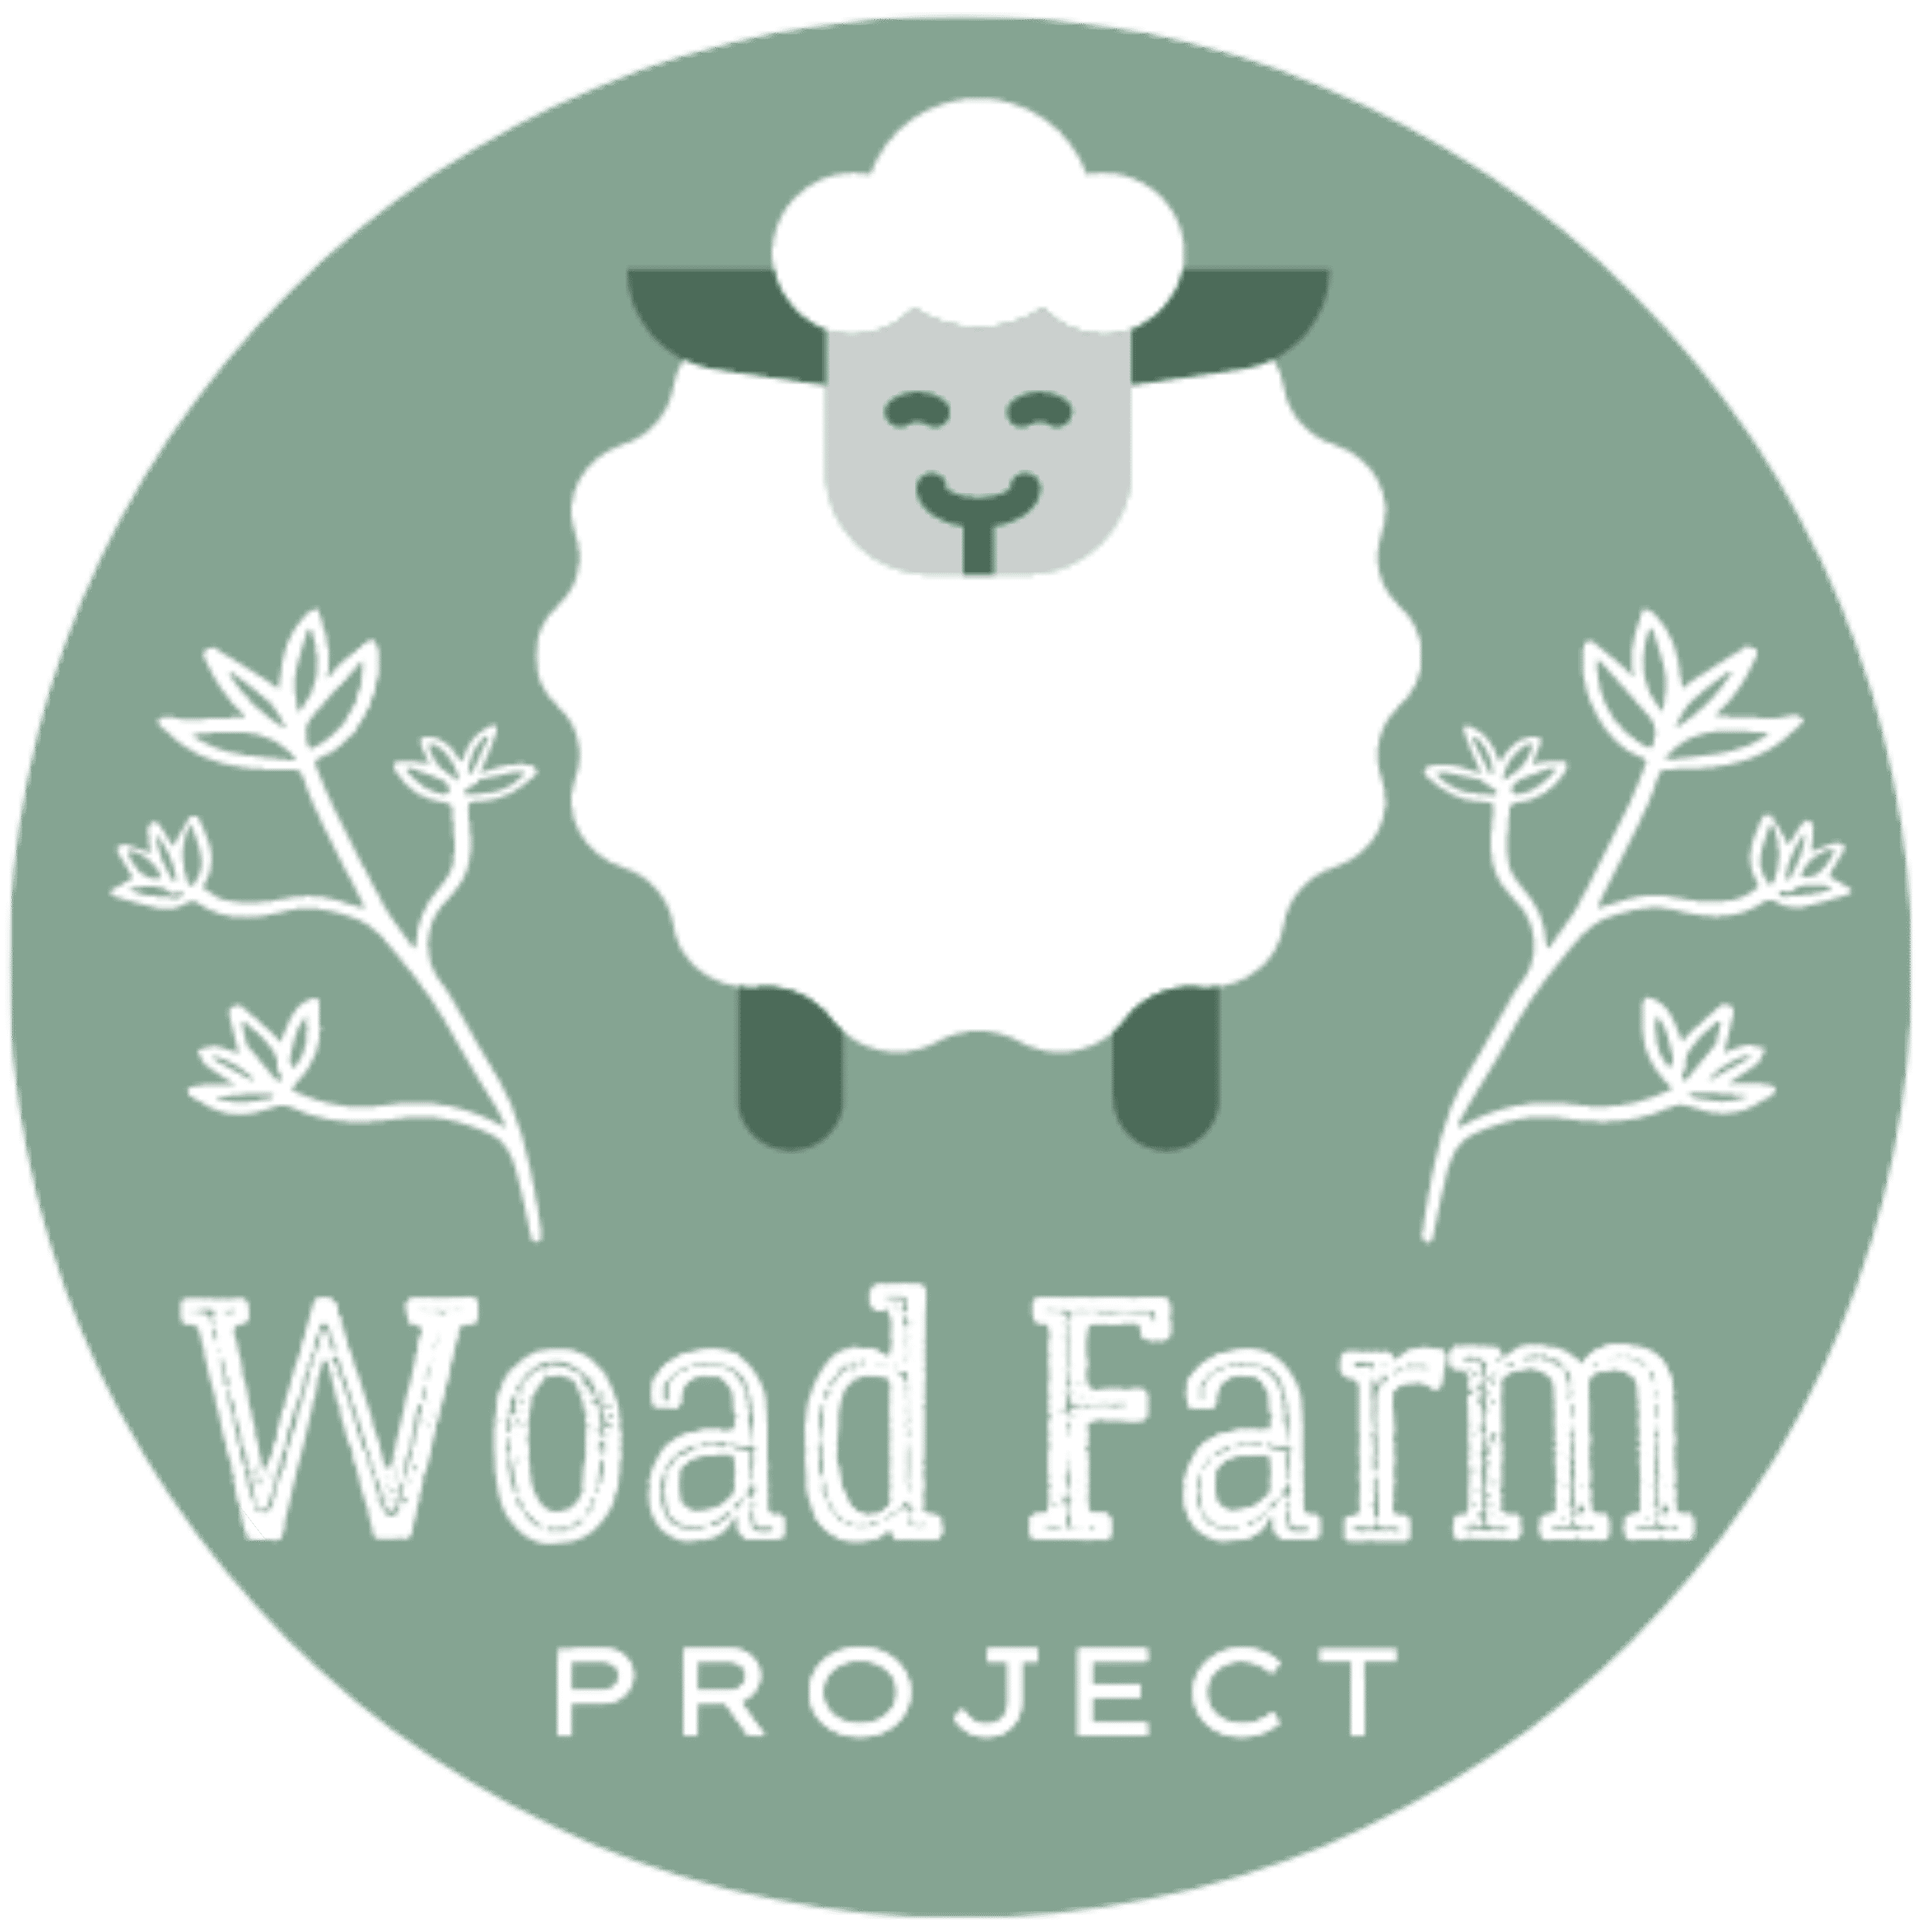 The Woad Farm Project